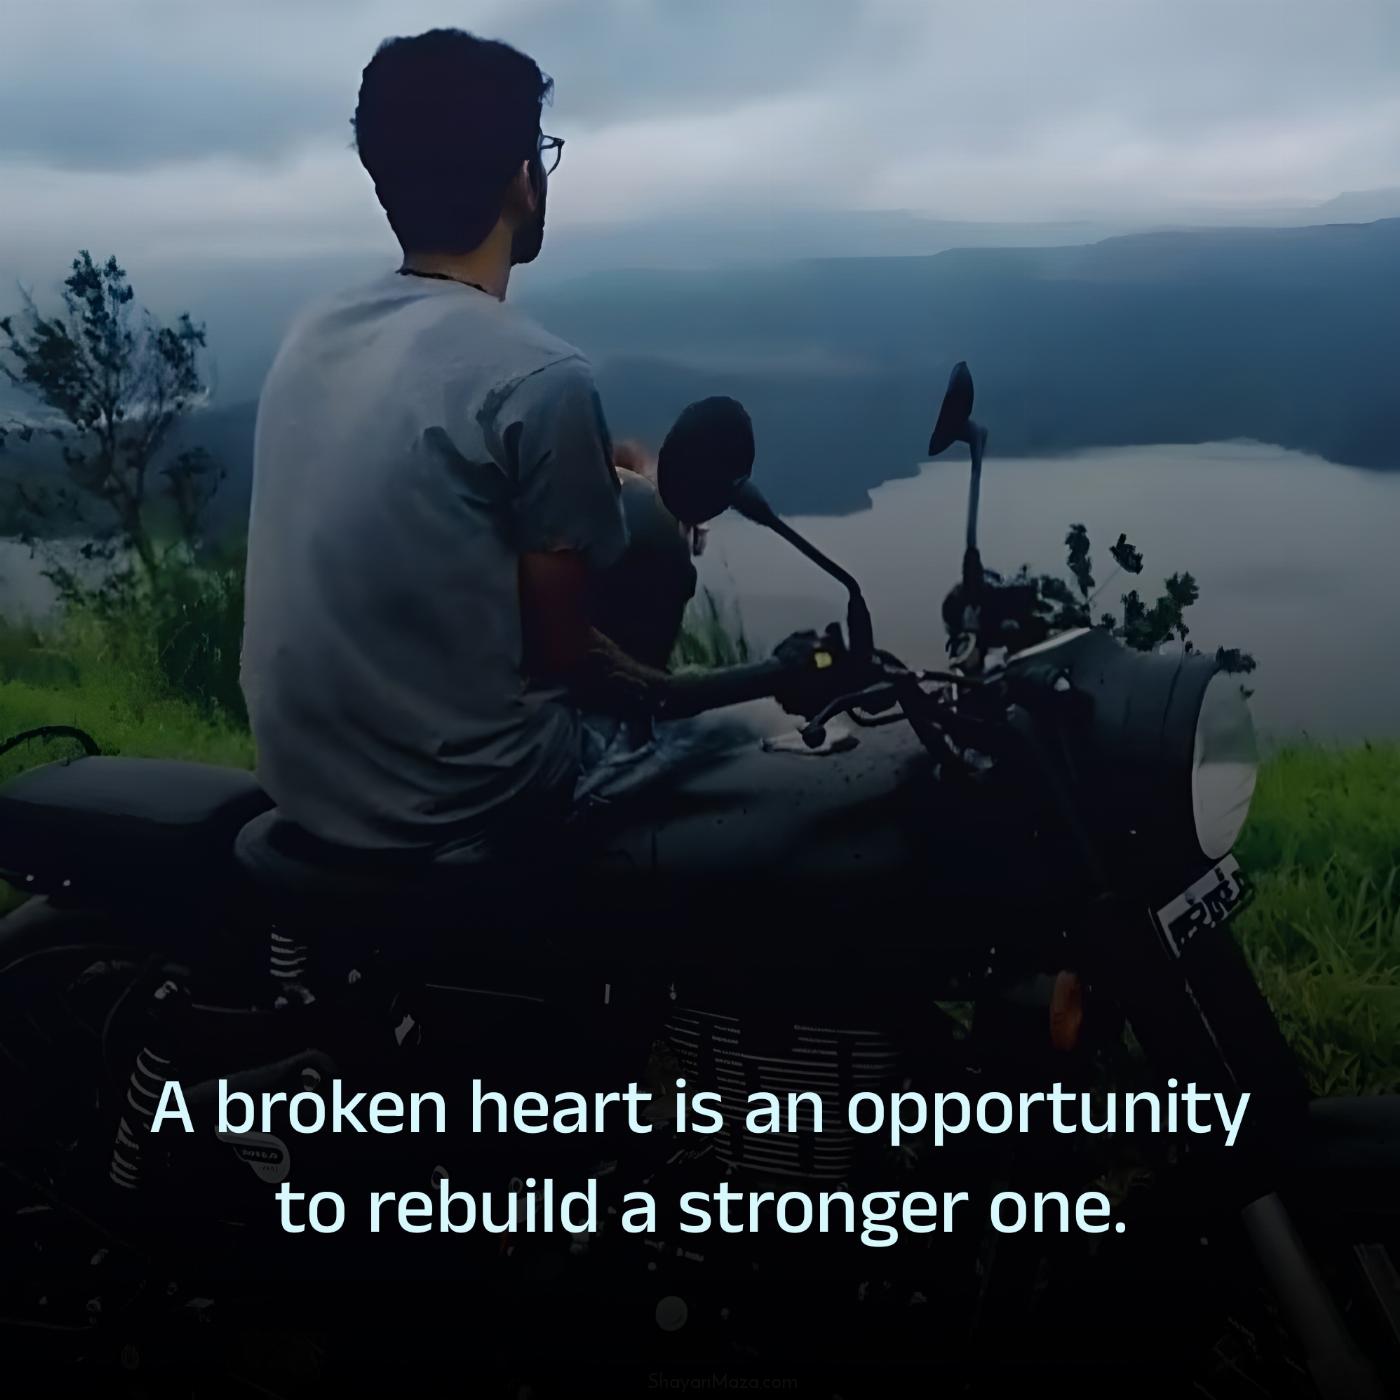 A broken heart is an opportunity to rebuild a stronger one